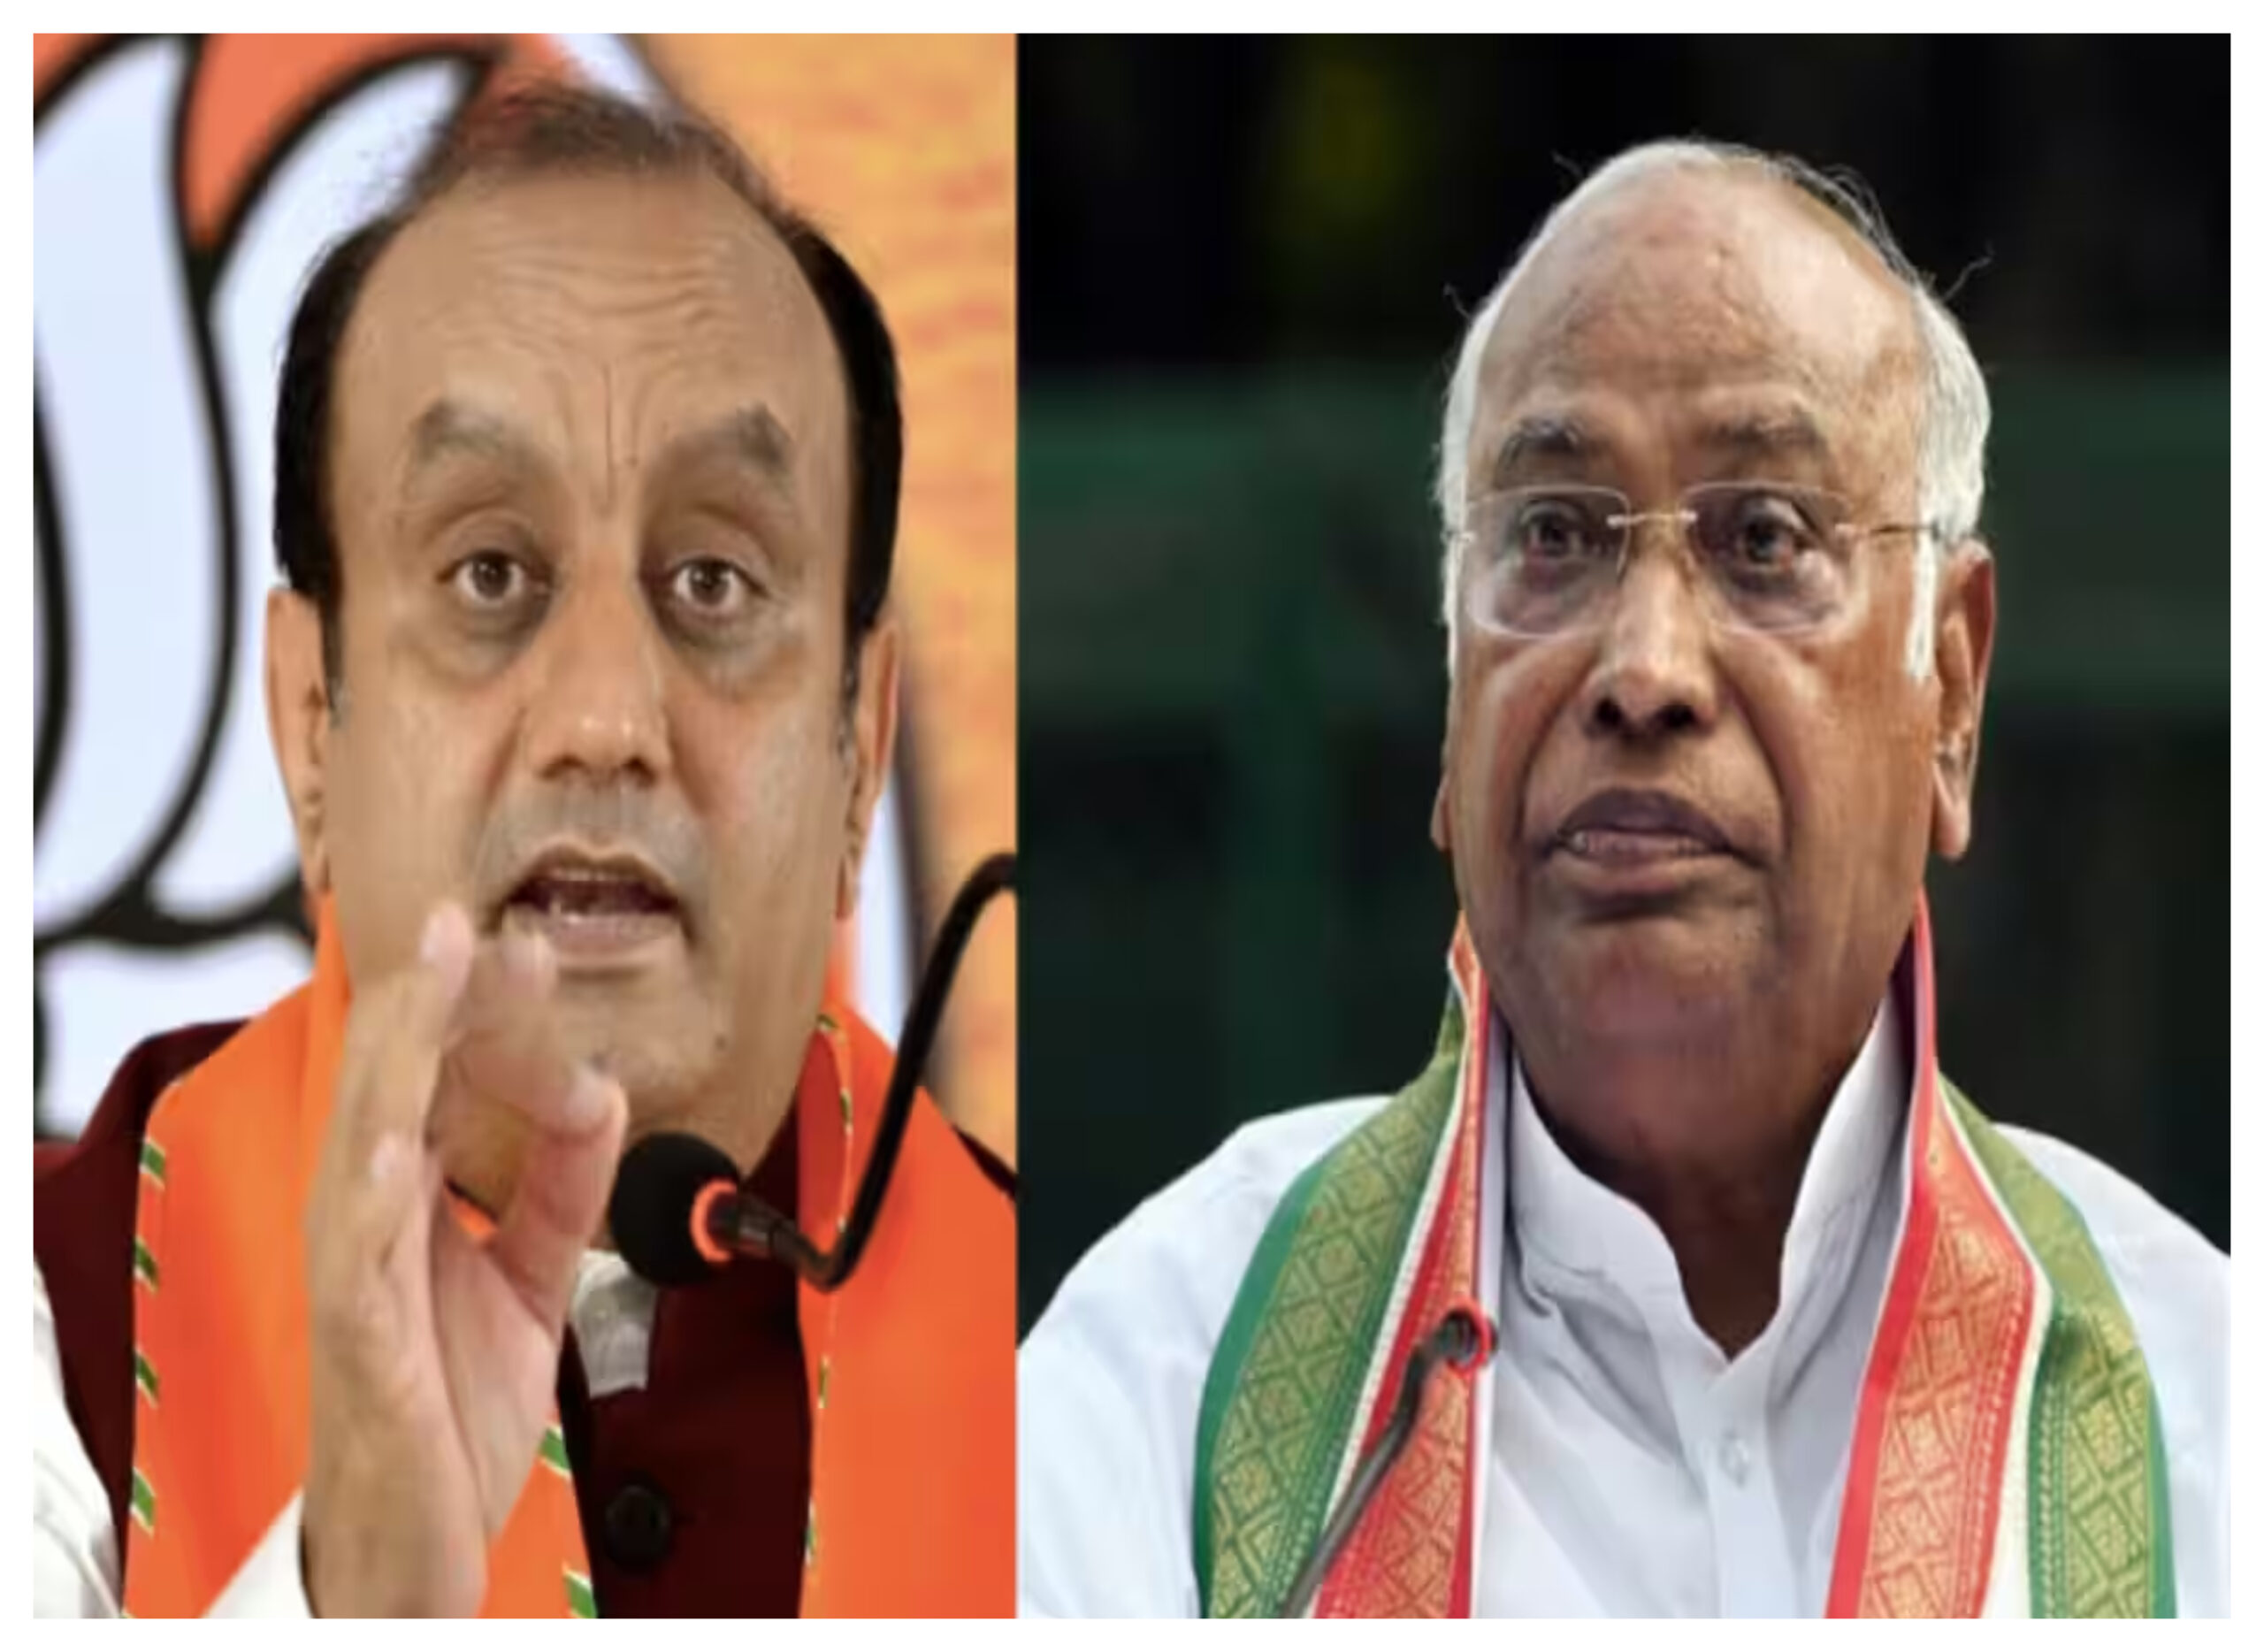 Article 370: Sudhanshu Trivedi hit back at Kharge's sharp statement, said Congress has lost the status of being a national party, Sudhanshu Trivedi, Bjp, Congress, Political news in hindi, Artical 370, Totaltv news in hindi